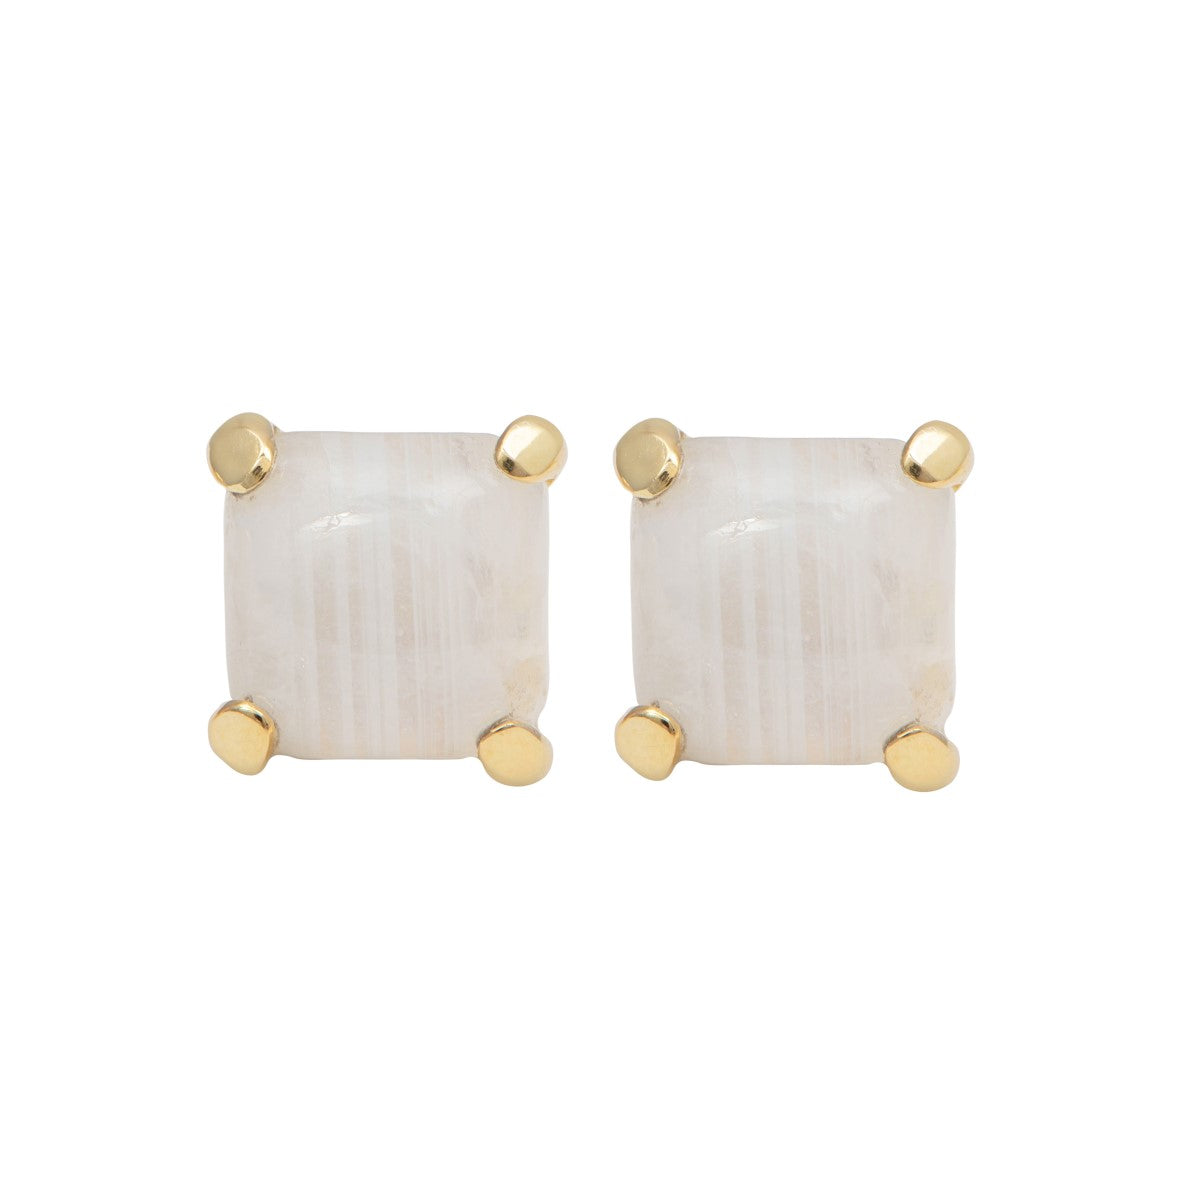 Square Cabochon Moonstone Stud Earrings in Gold Plated Sterling Silver